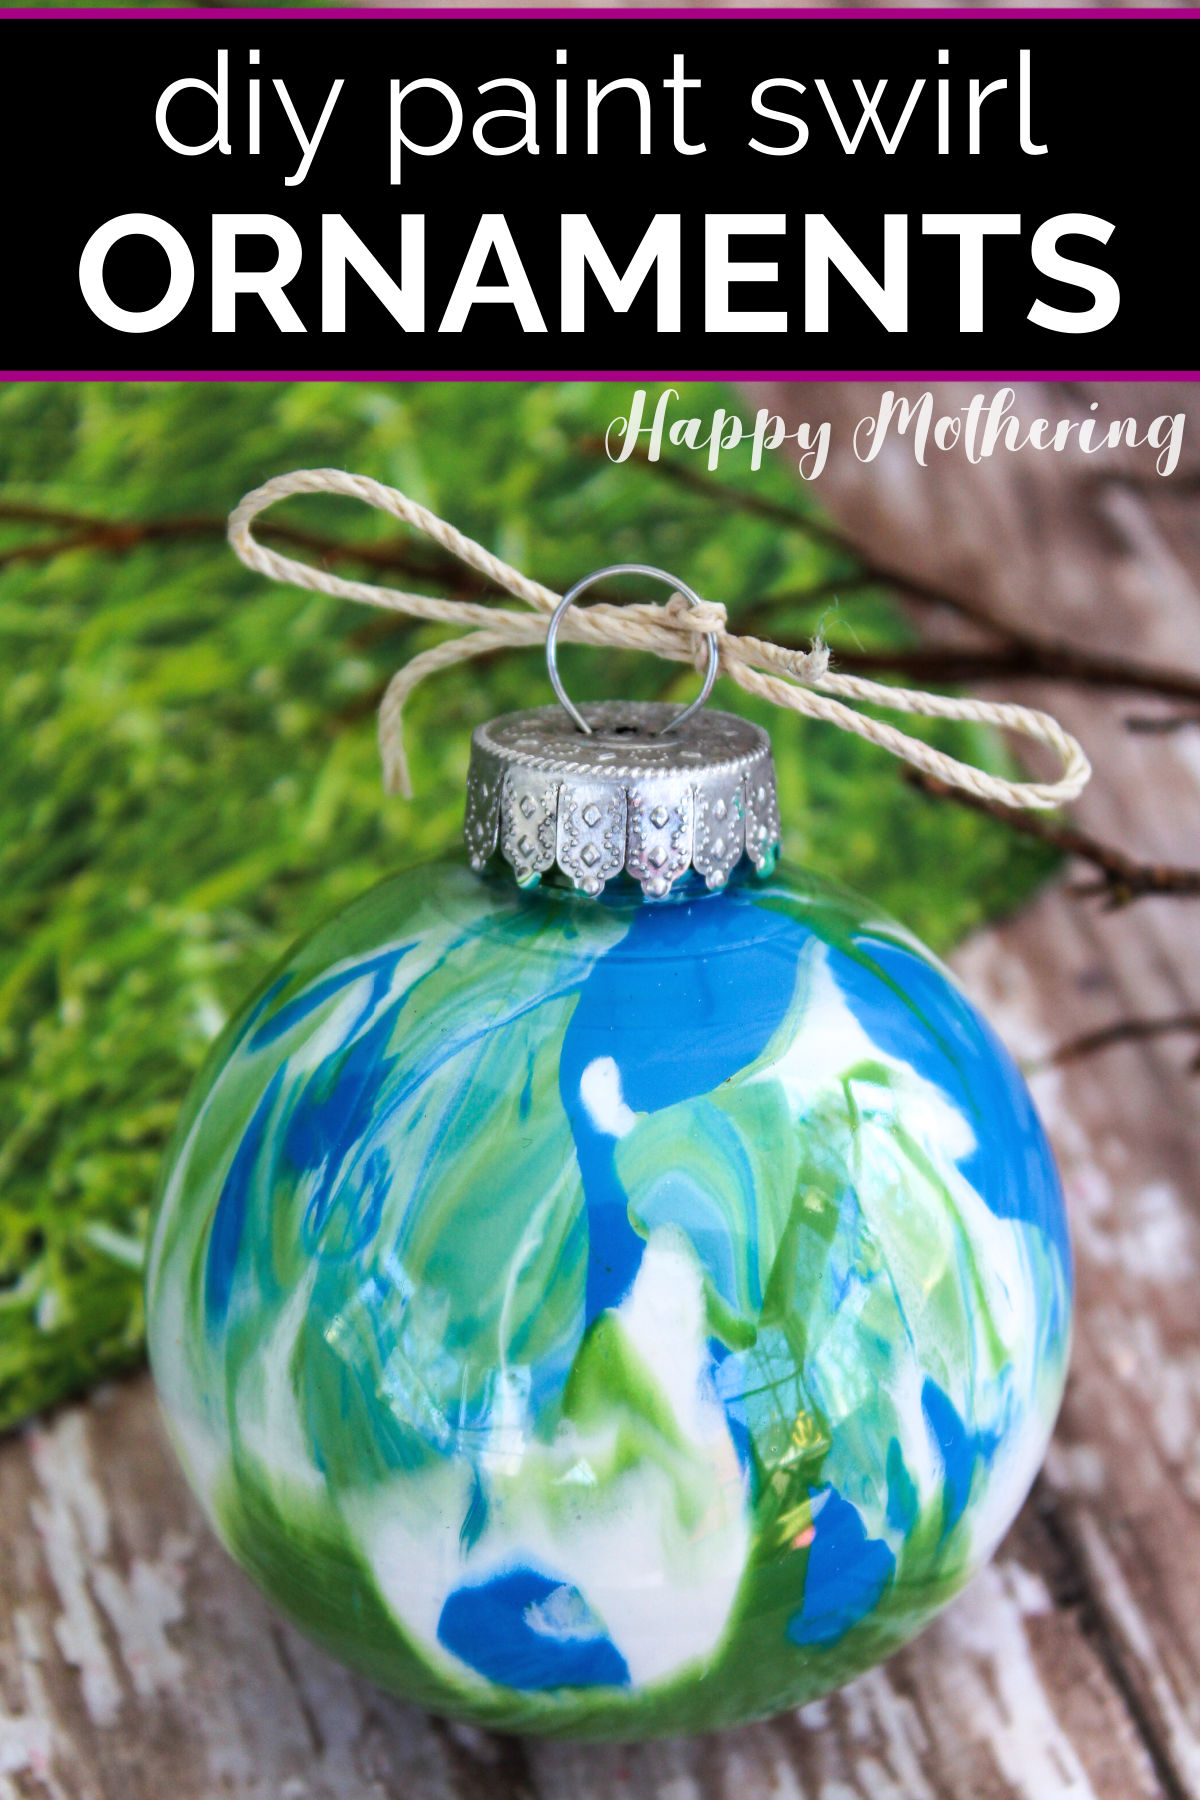 Finished swirled paint Christmas ornament that resembles Earth